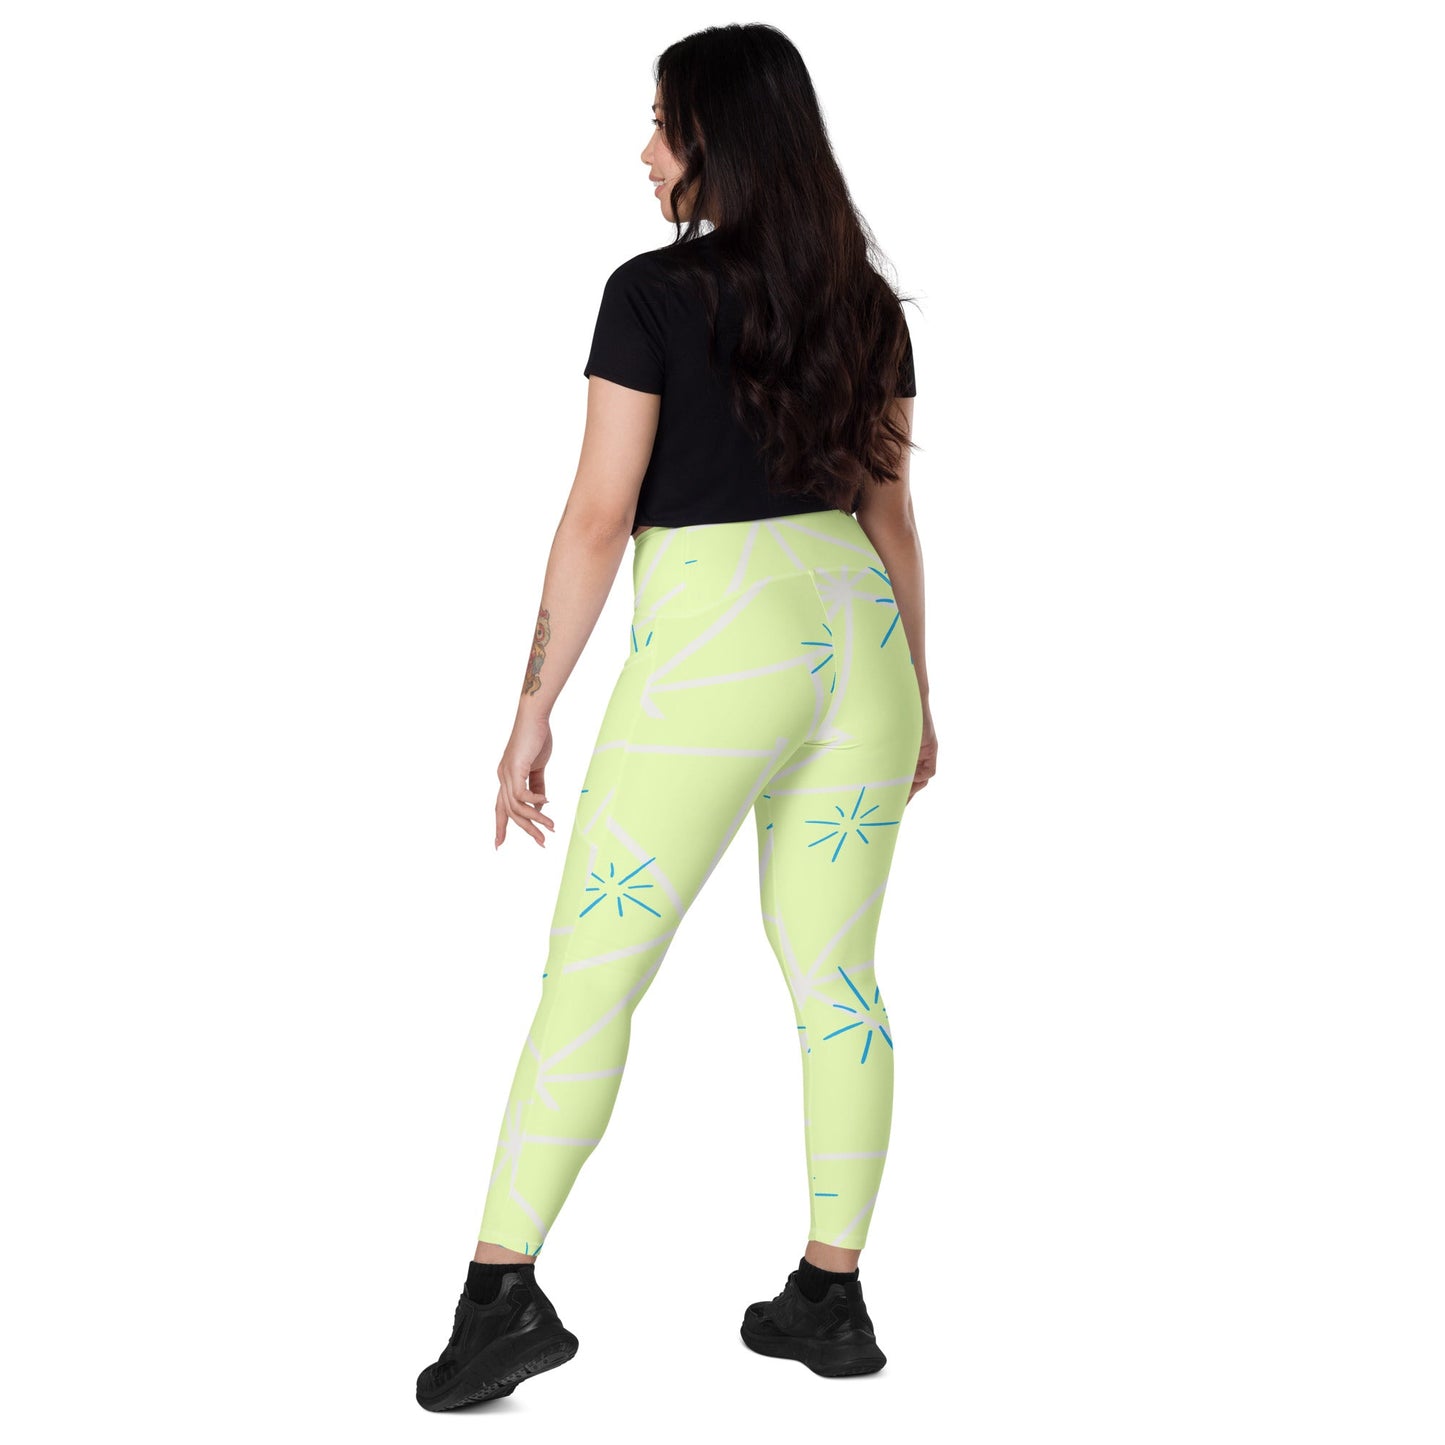 The Joy Leggings with pockets active wearcosplaycosplay style#tag4##tag5##tag6#